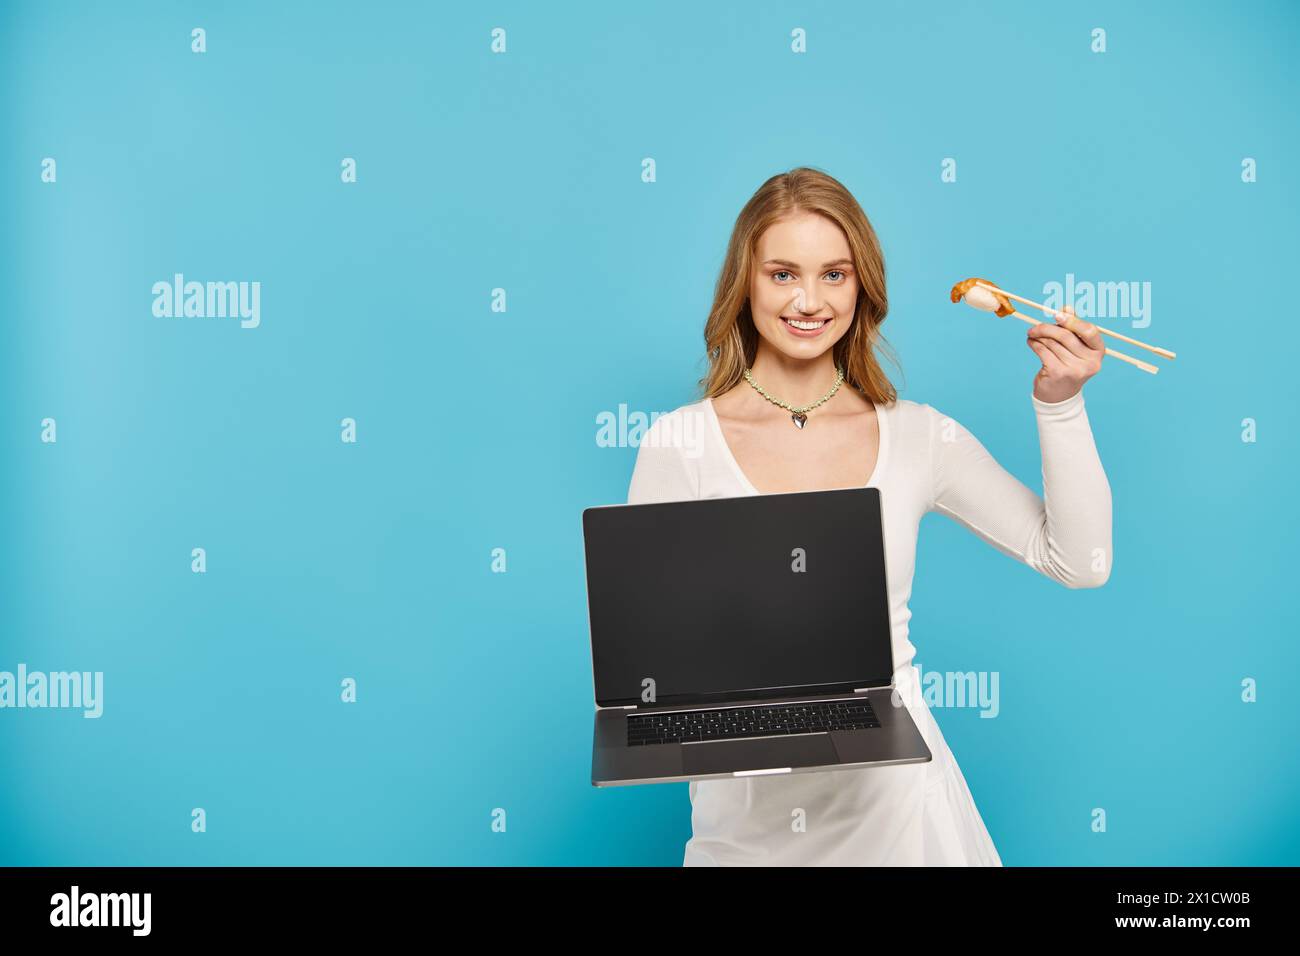 A blonde woman holding a laptop and Asian food, showcasing a blend of technology and culinary delights. Stock Photo